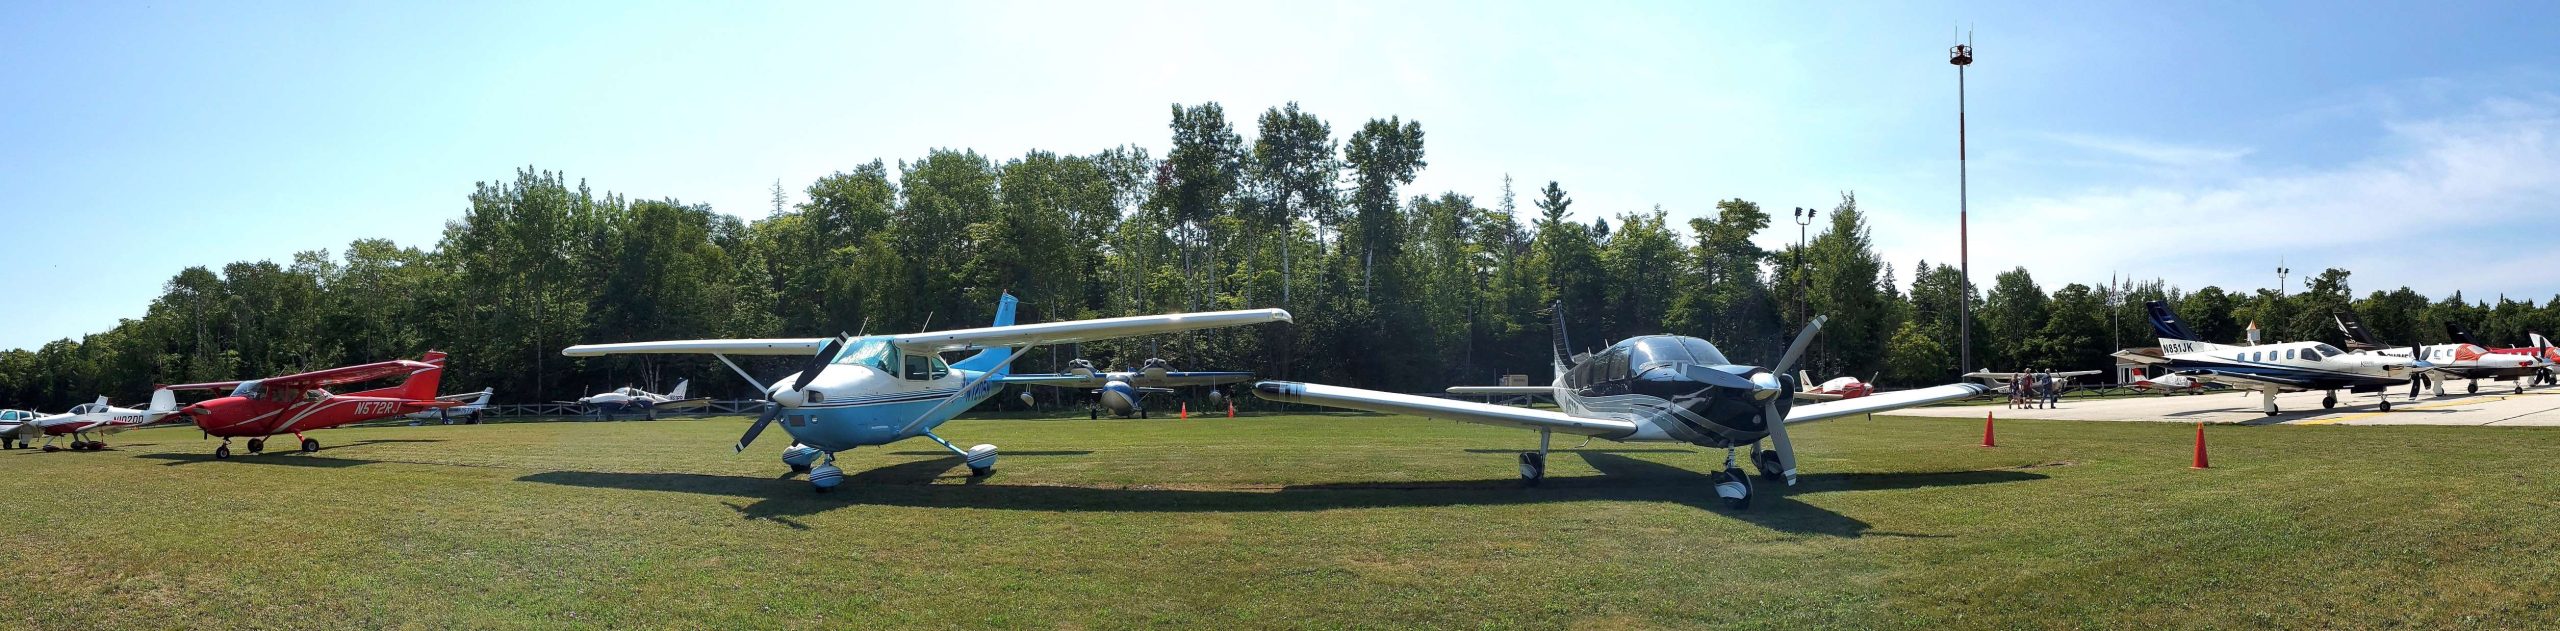 Aircraft parked on the field at Mackinac Island Airport.